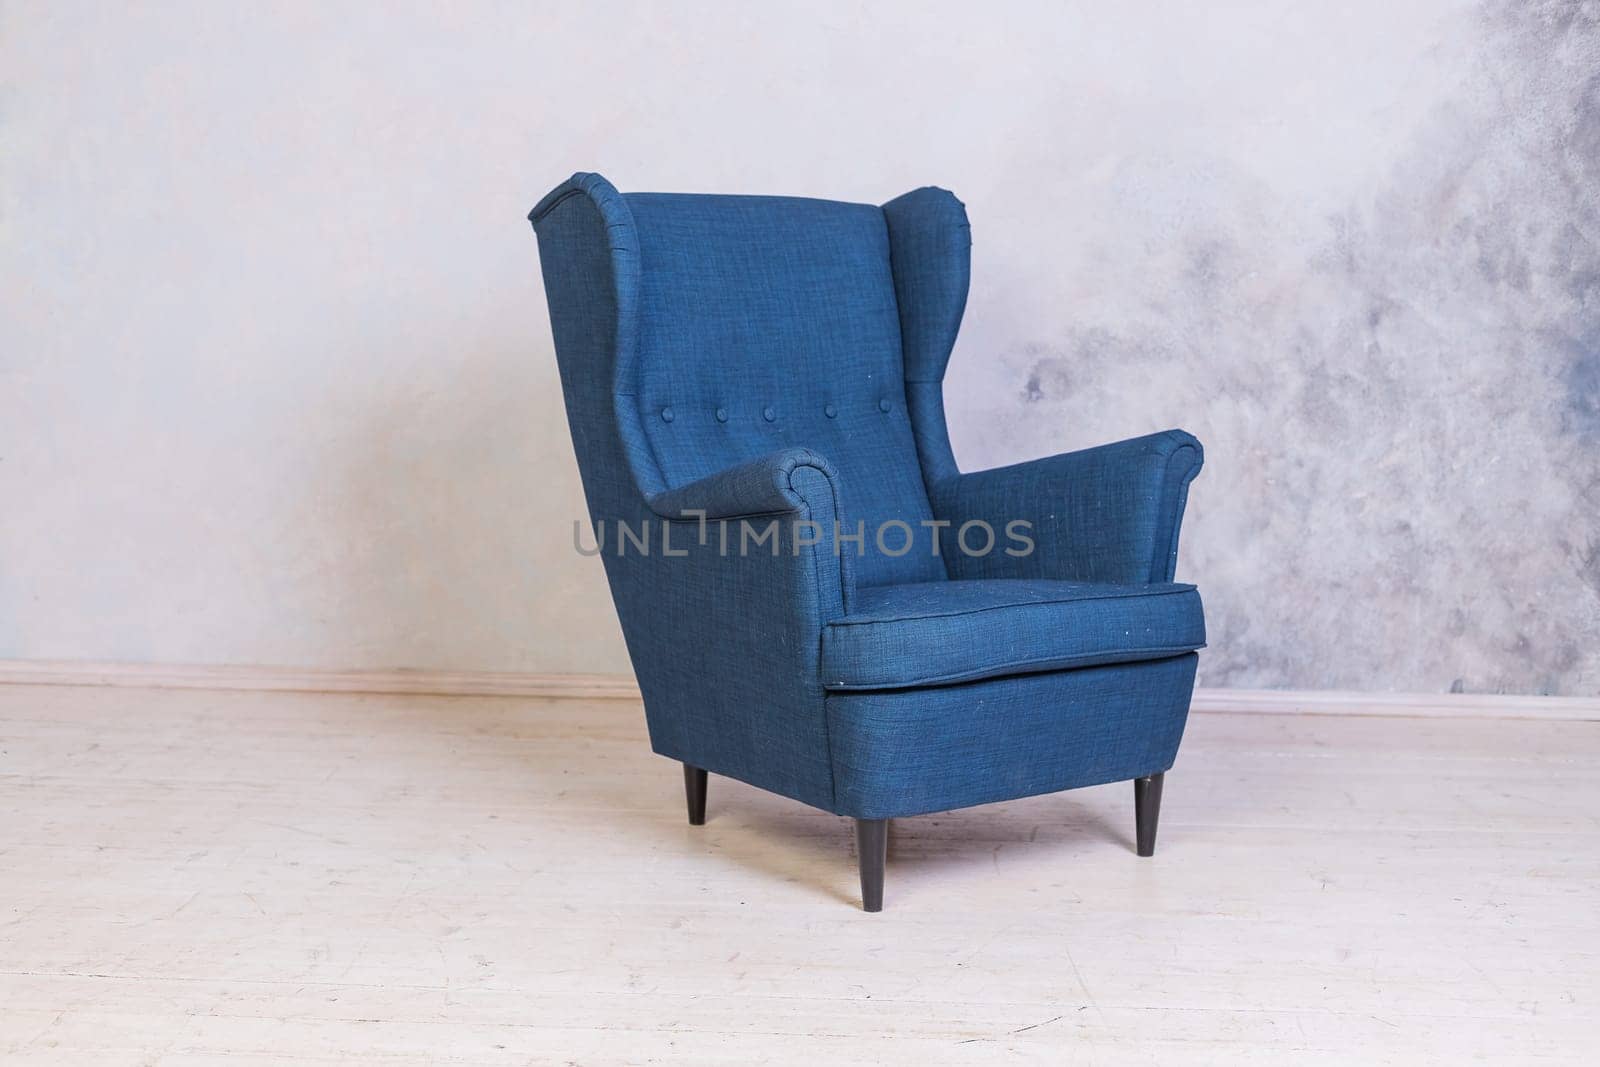 Classic blue chair. loft interior.Comfortable armchair against concrete wall background.Scandinavian style.Minimal Modern Furniture Recliner Object in Elegance Interior. Living Room Fashion Design with Copy Space by YuliaYaspe1979